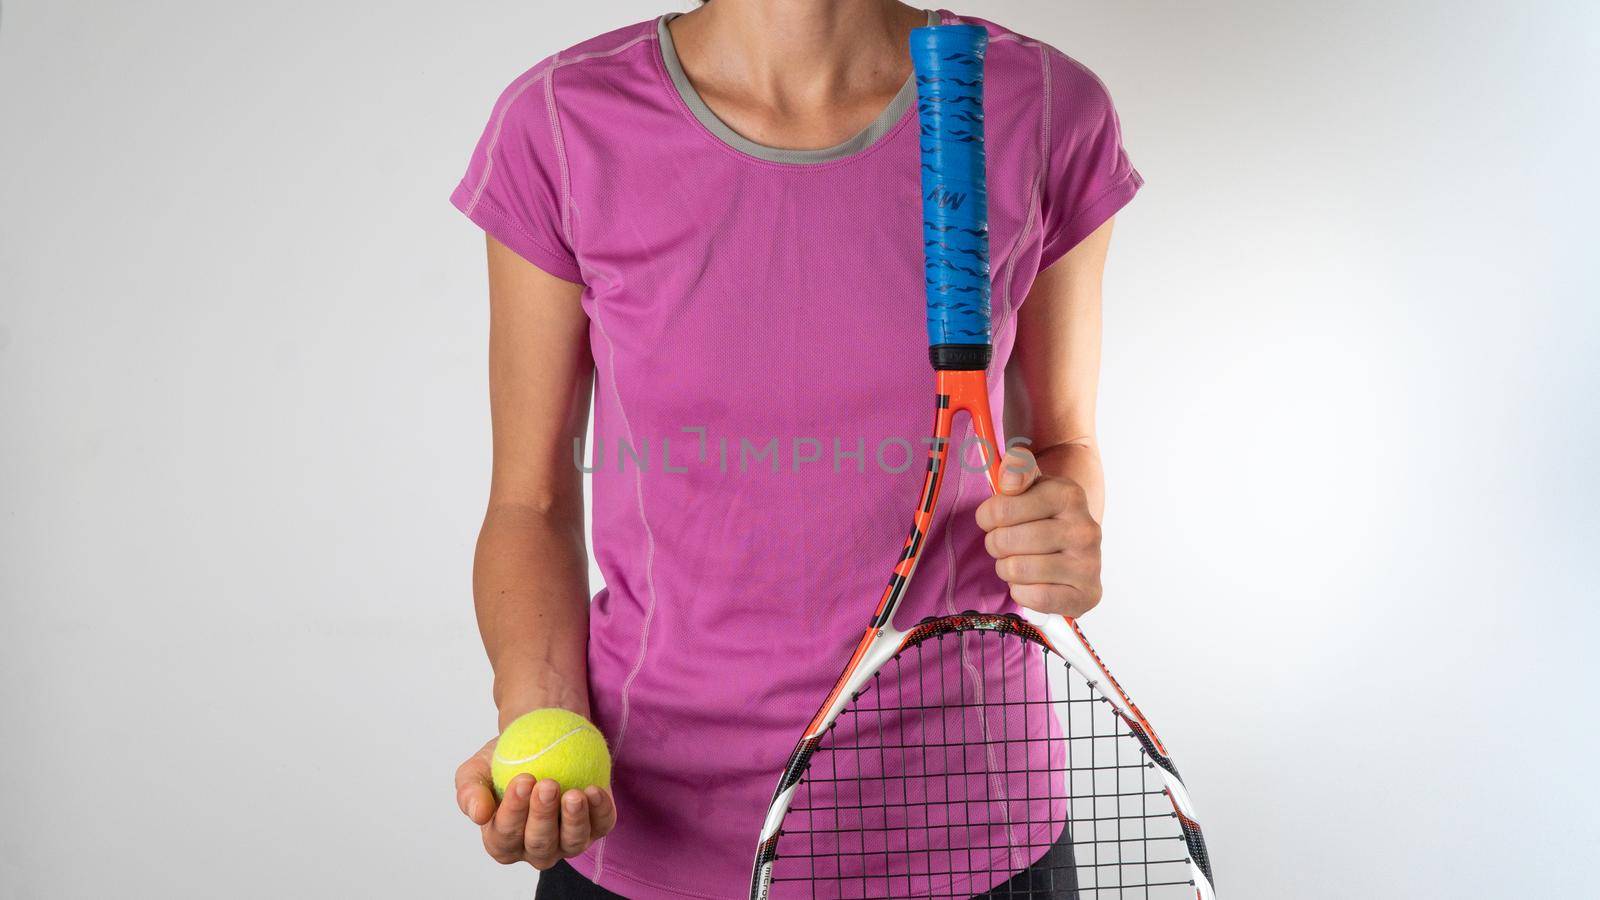 A woman holds a racket and a tennis ball. High quality photo